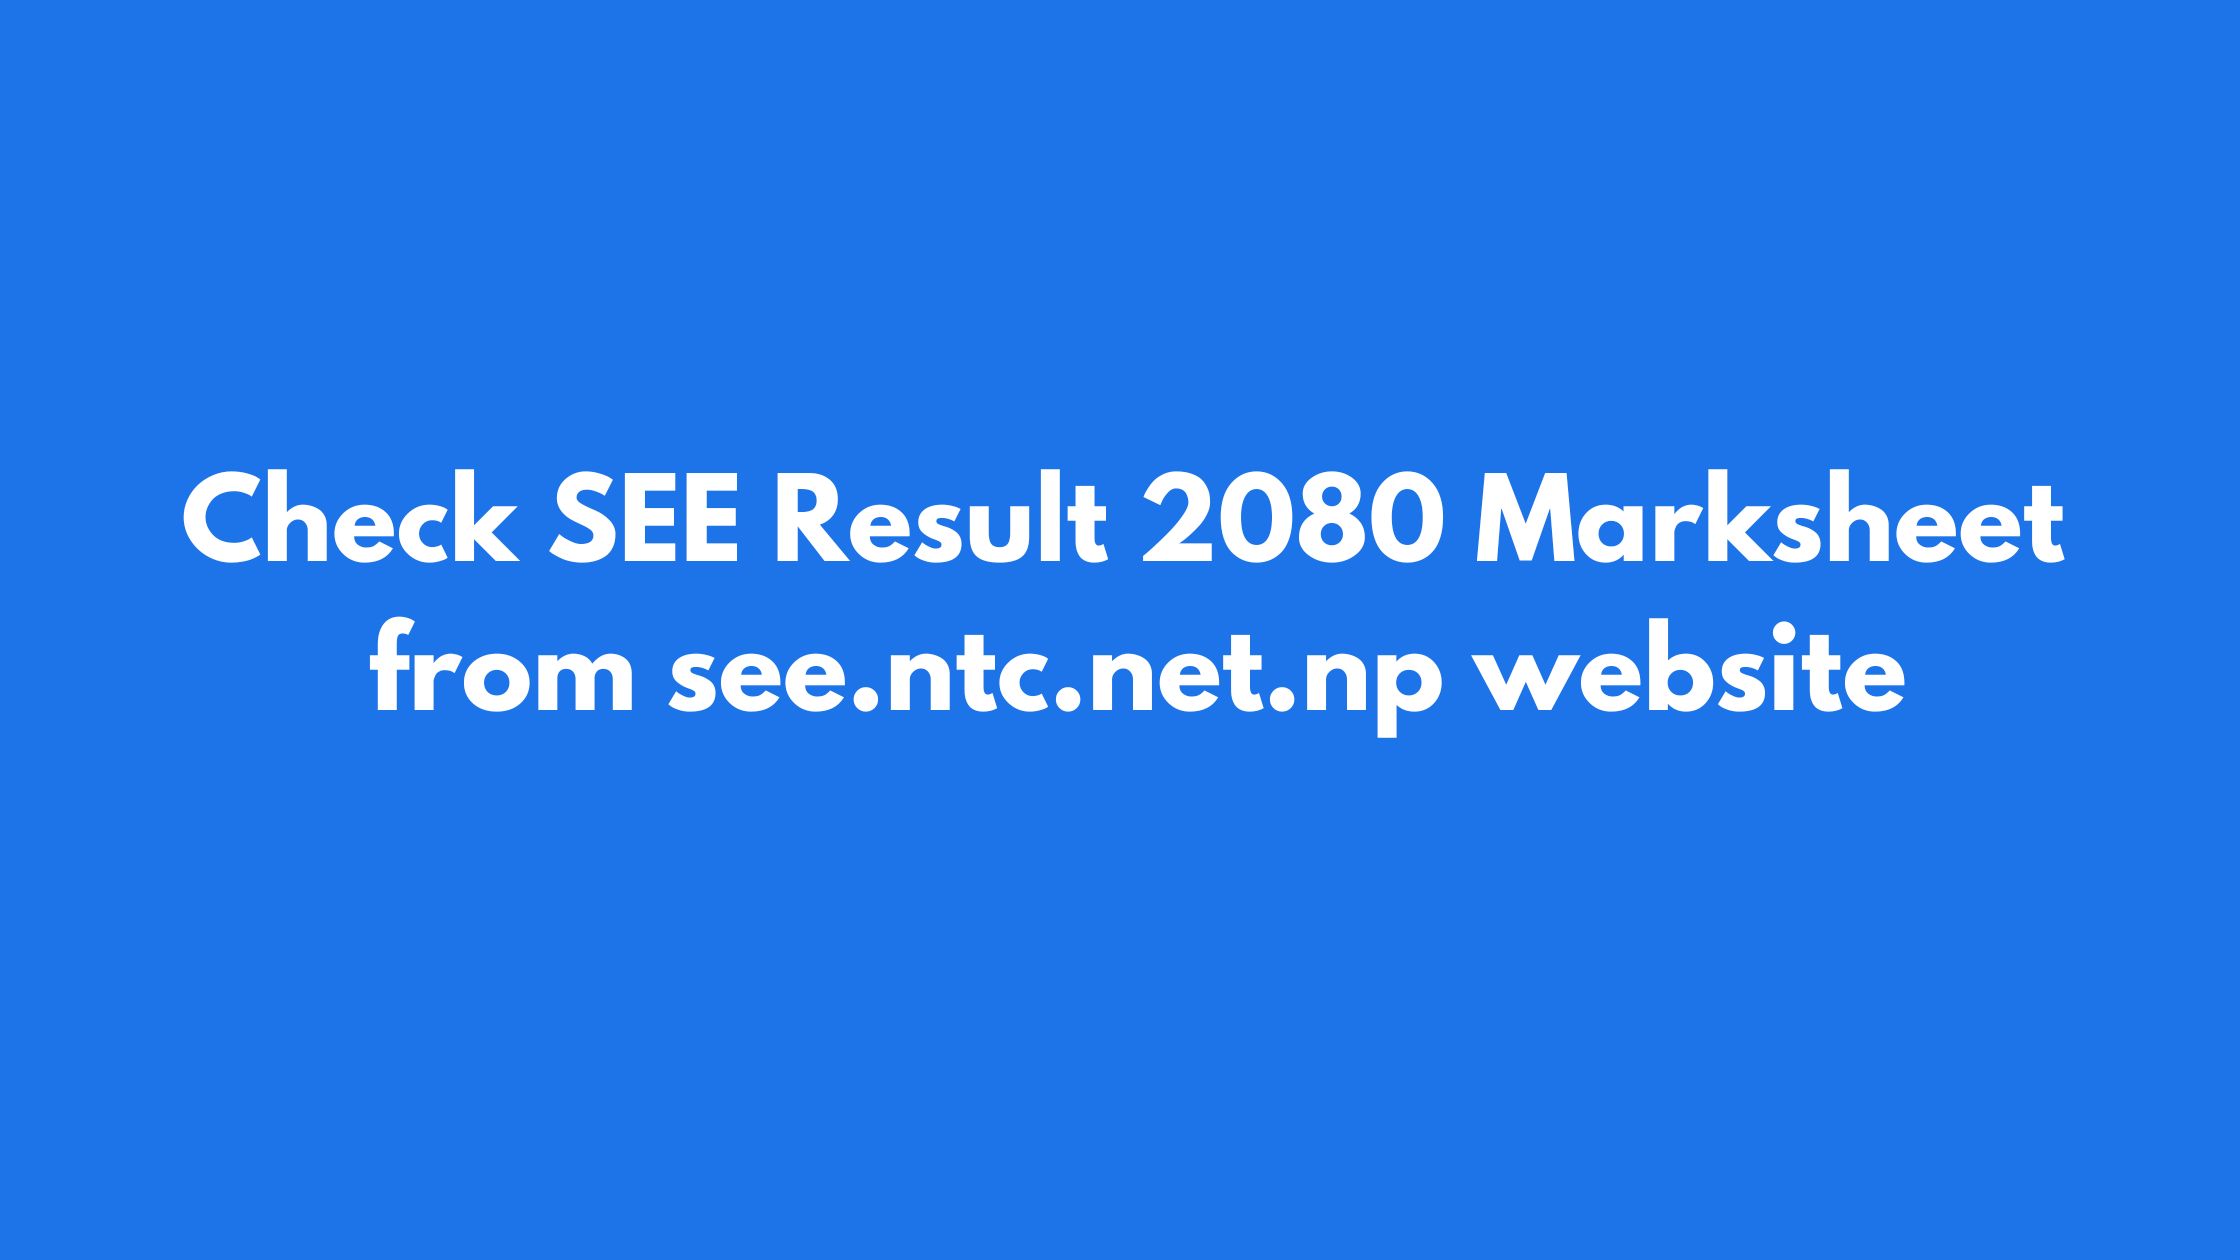 Check SEE Result 2080 Marksheet from see.ntc.net.np website